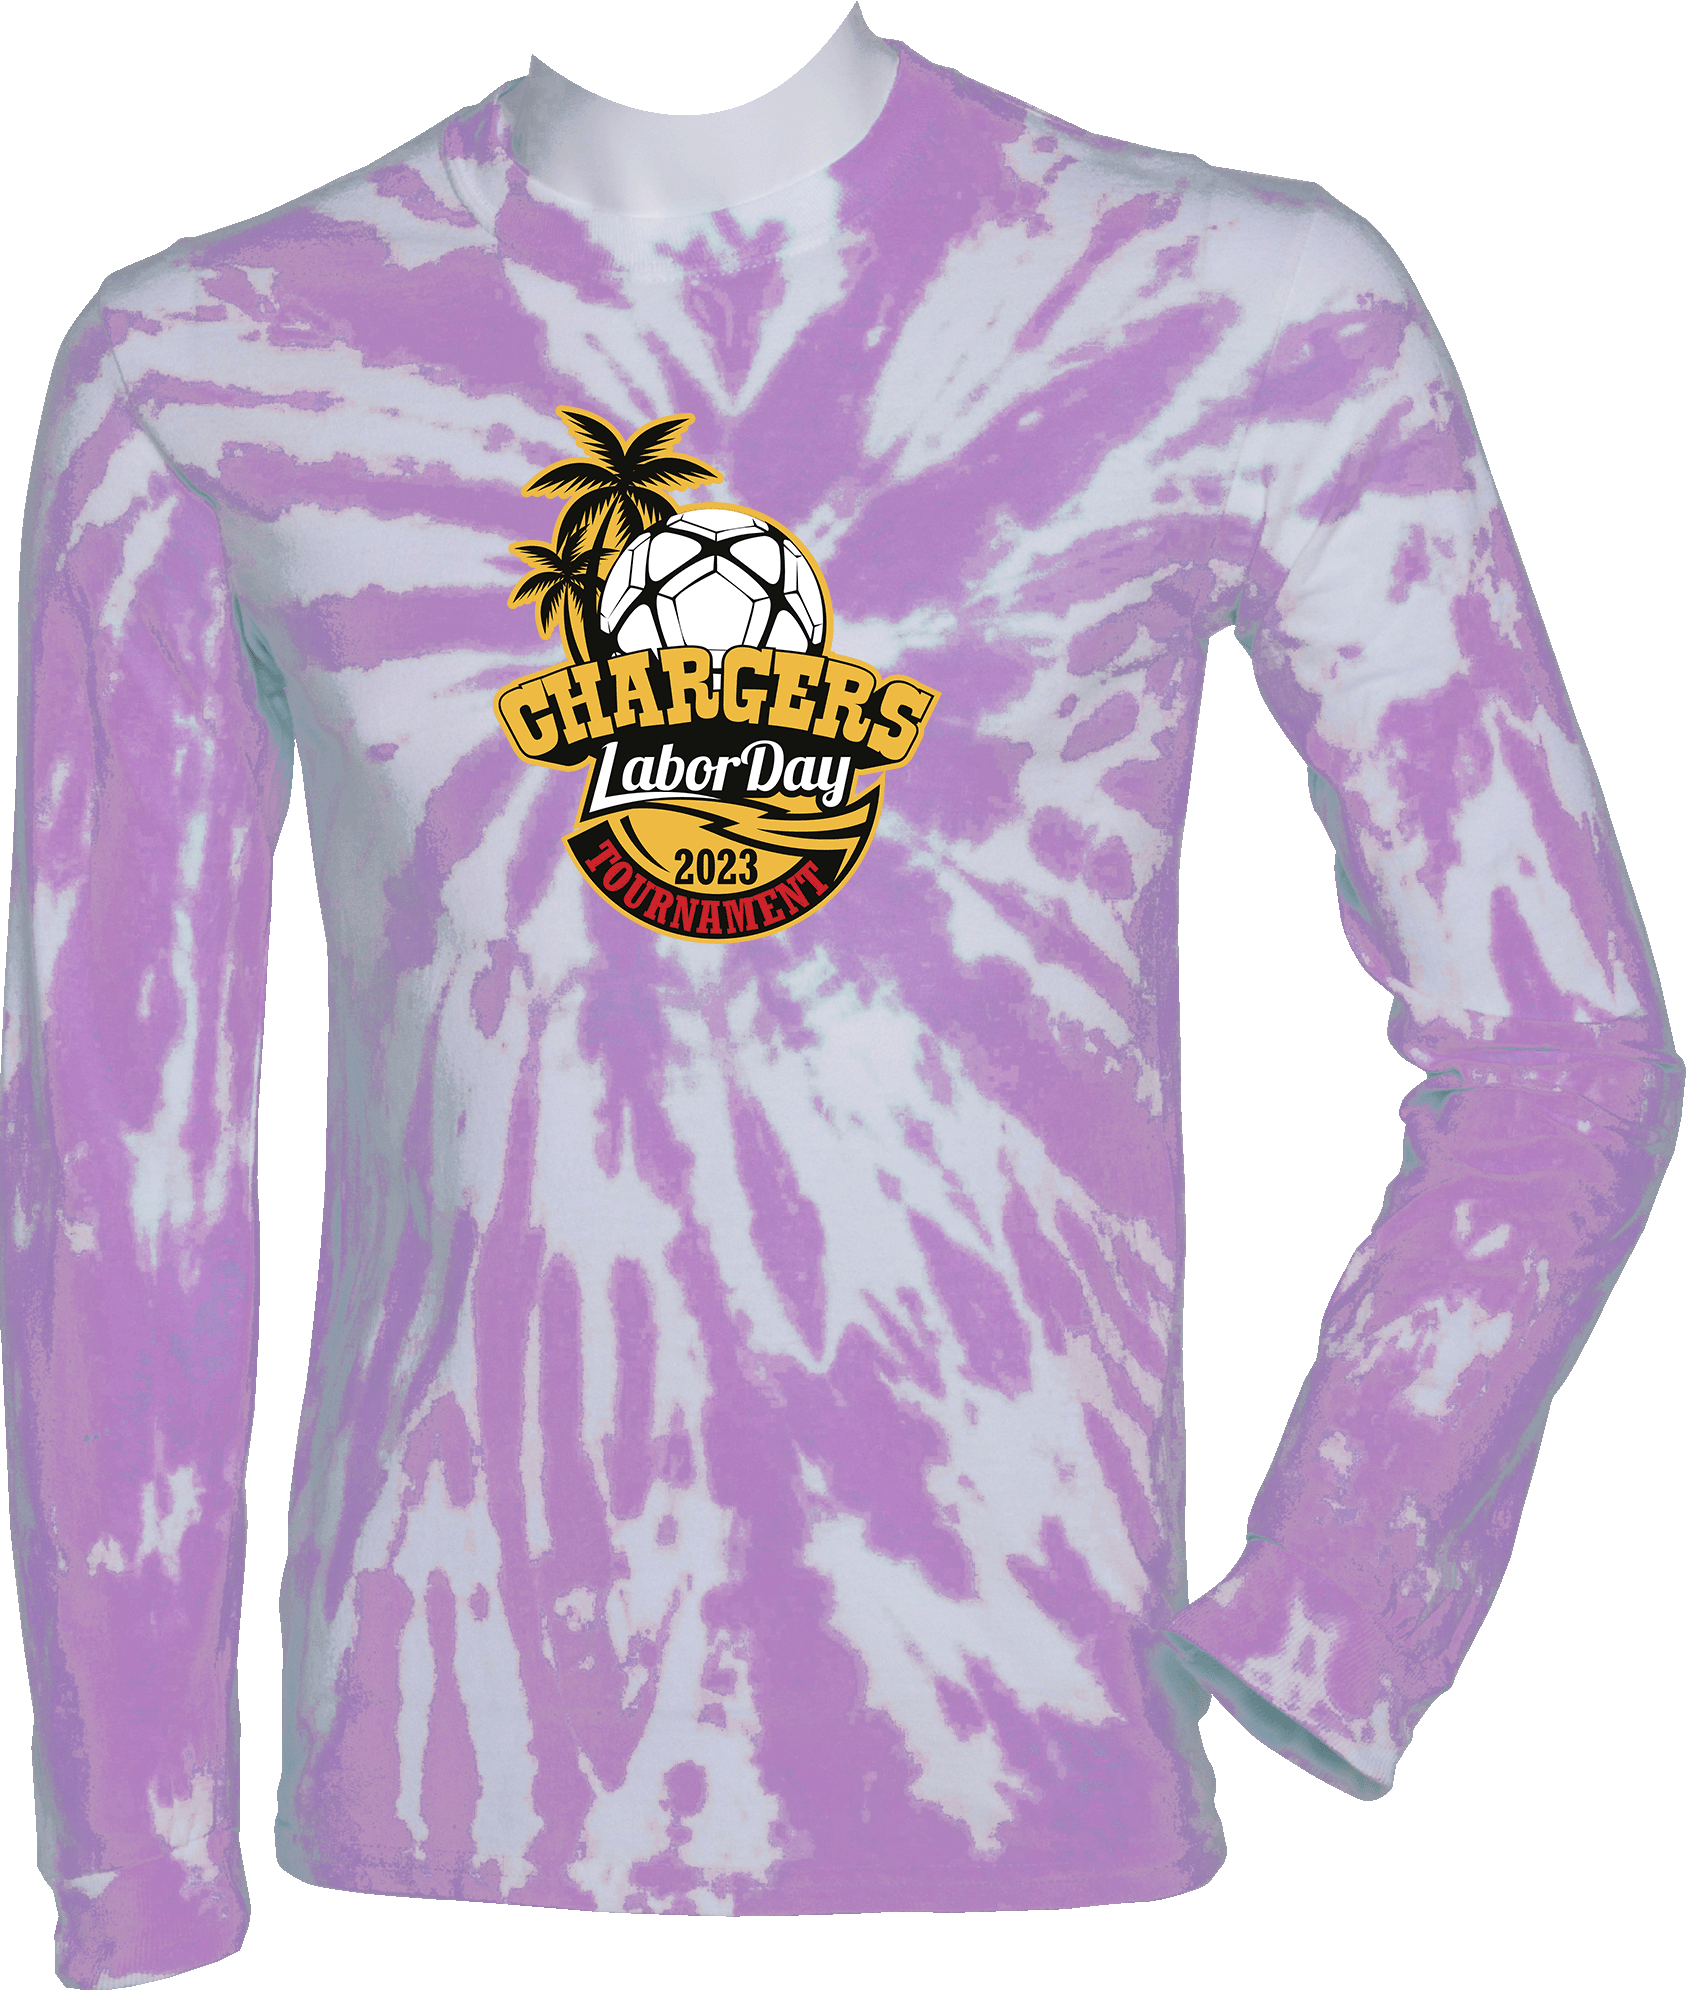 Tie-Dye Long Sleeves - 2023 Chargers Labor Day Tournament